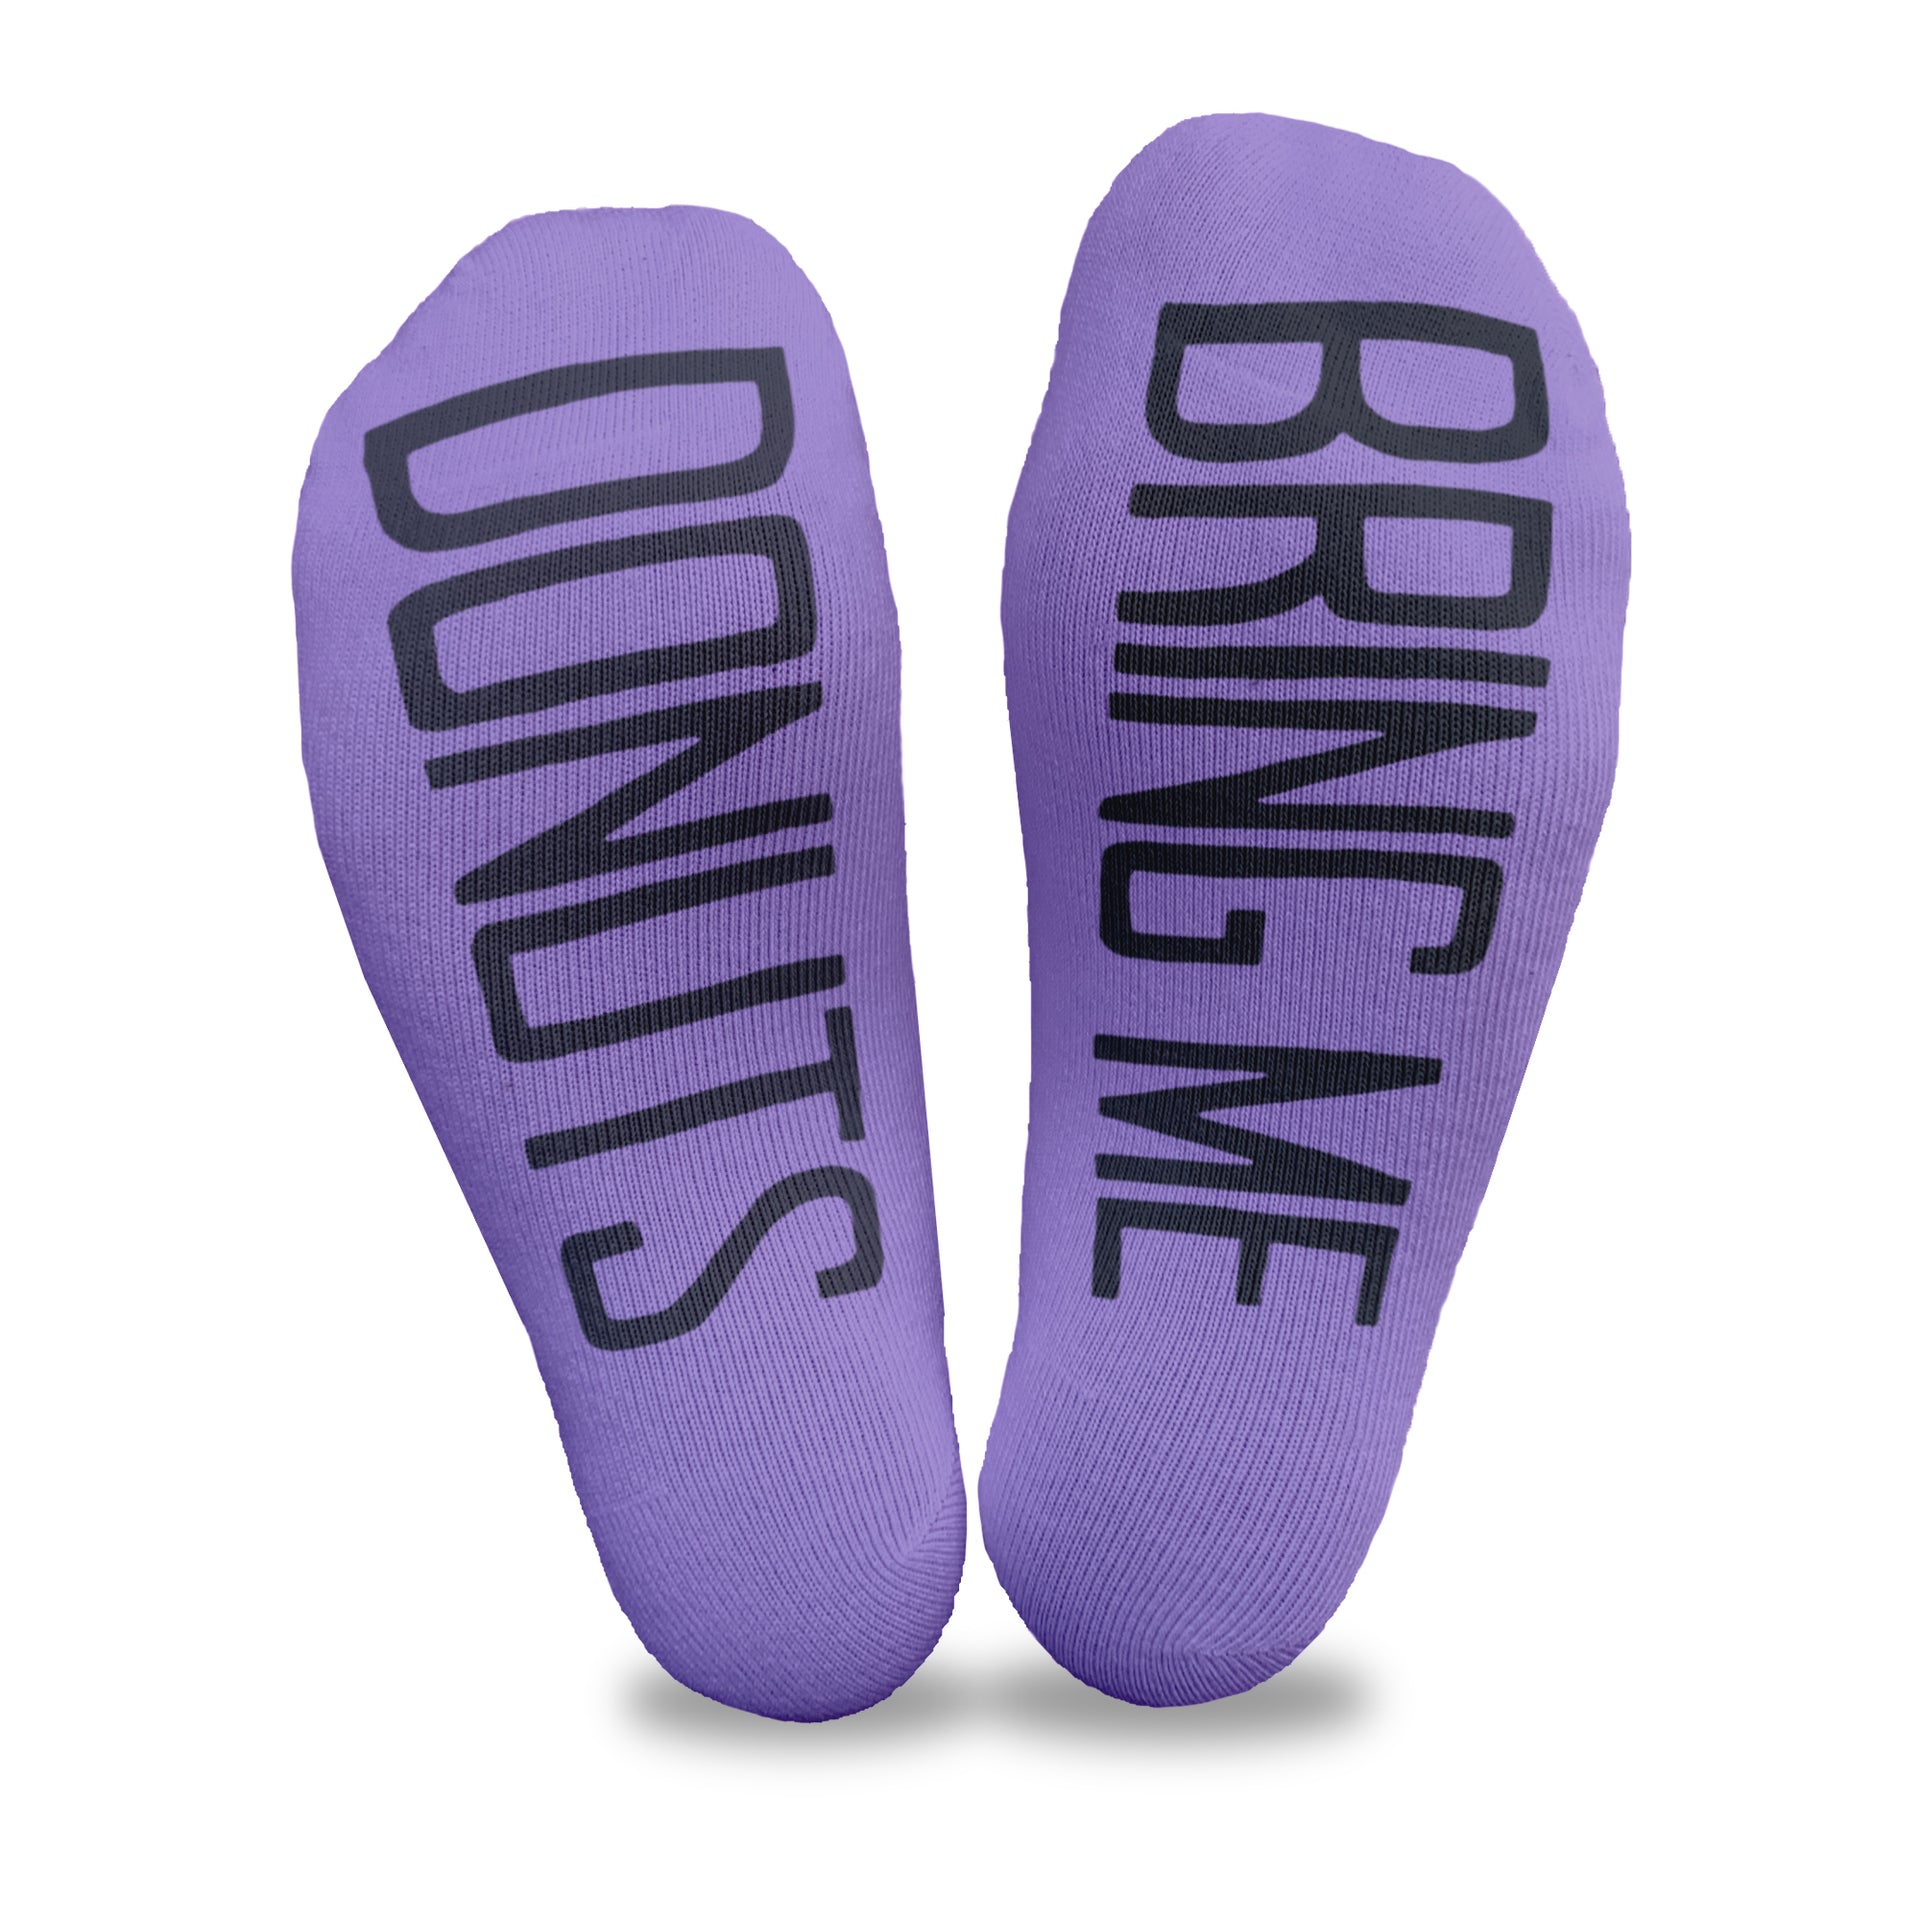 Bring me donuts custom printed on the bottom soles of purple cotton no show socks is a great gift for any donut lover.